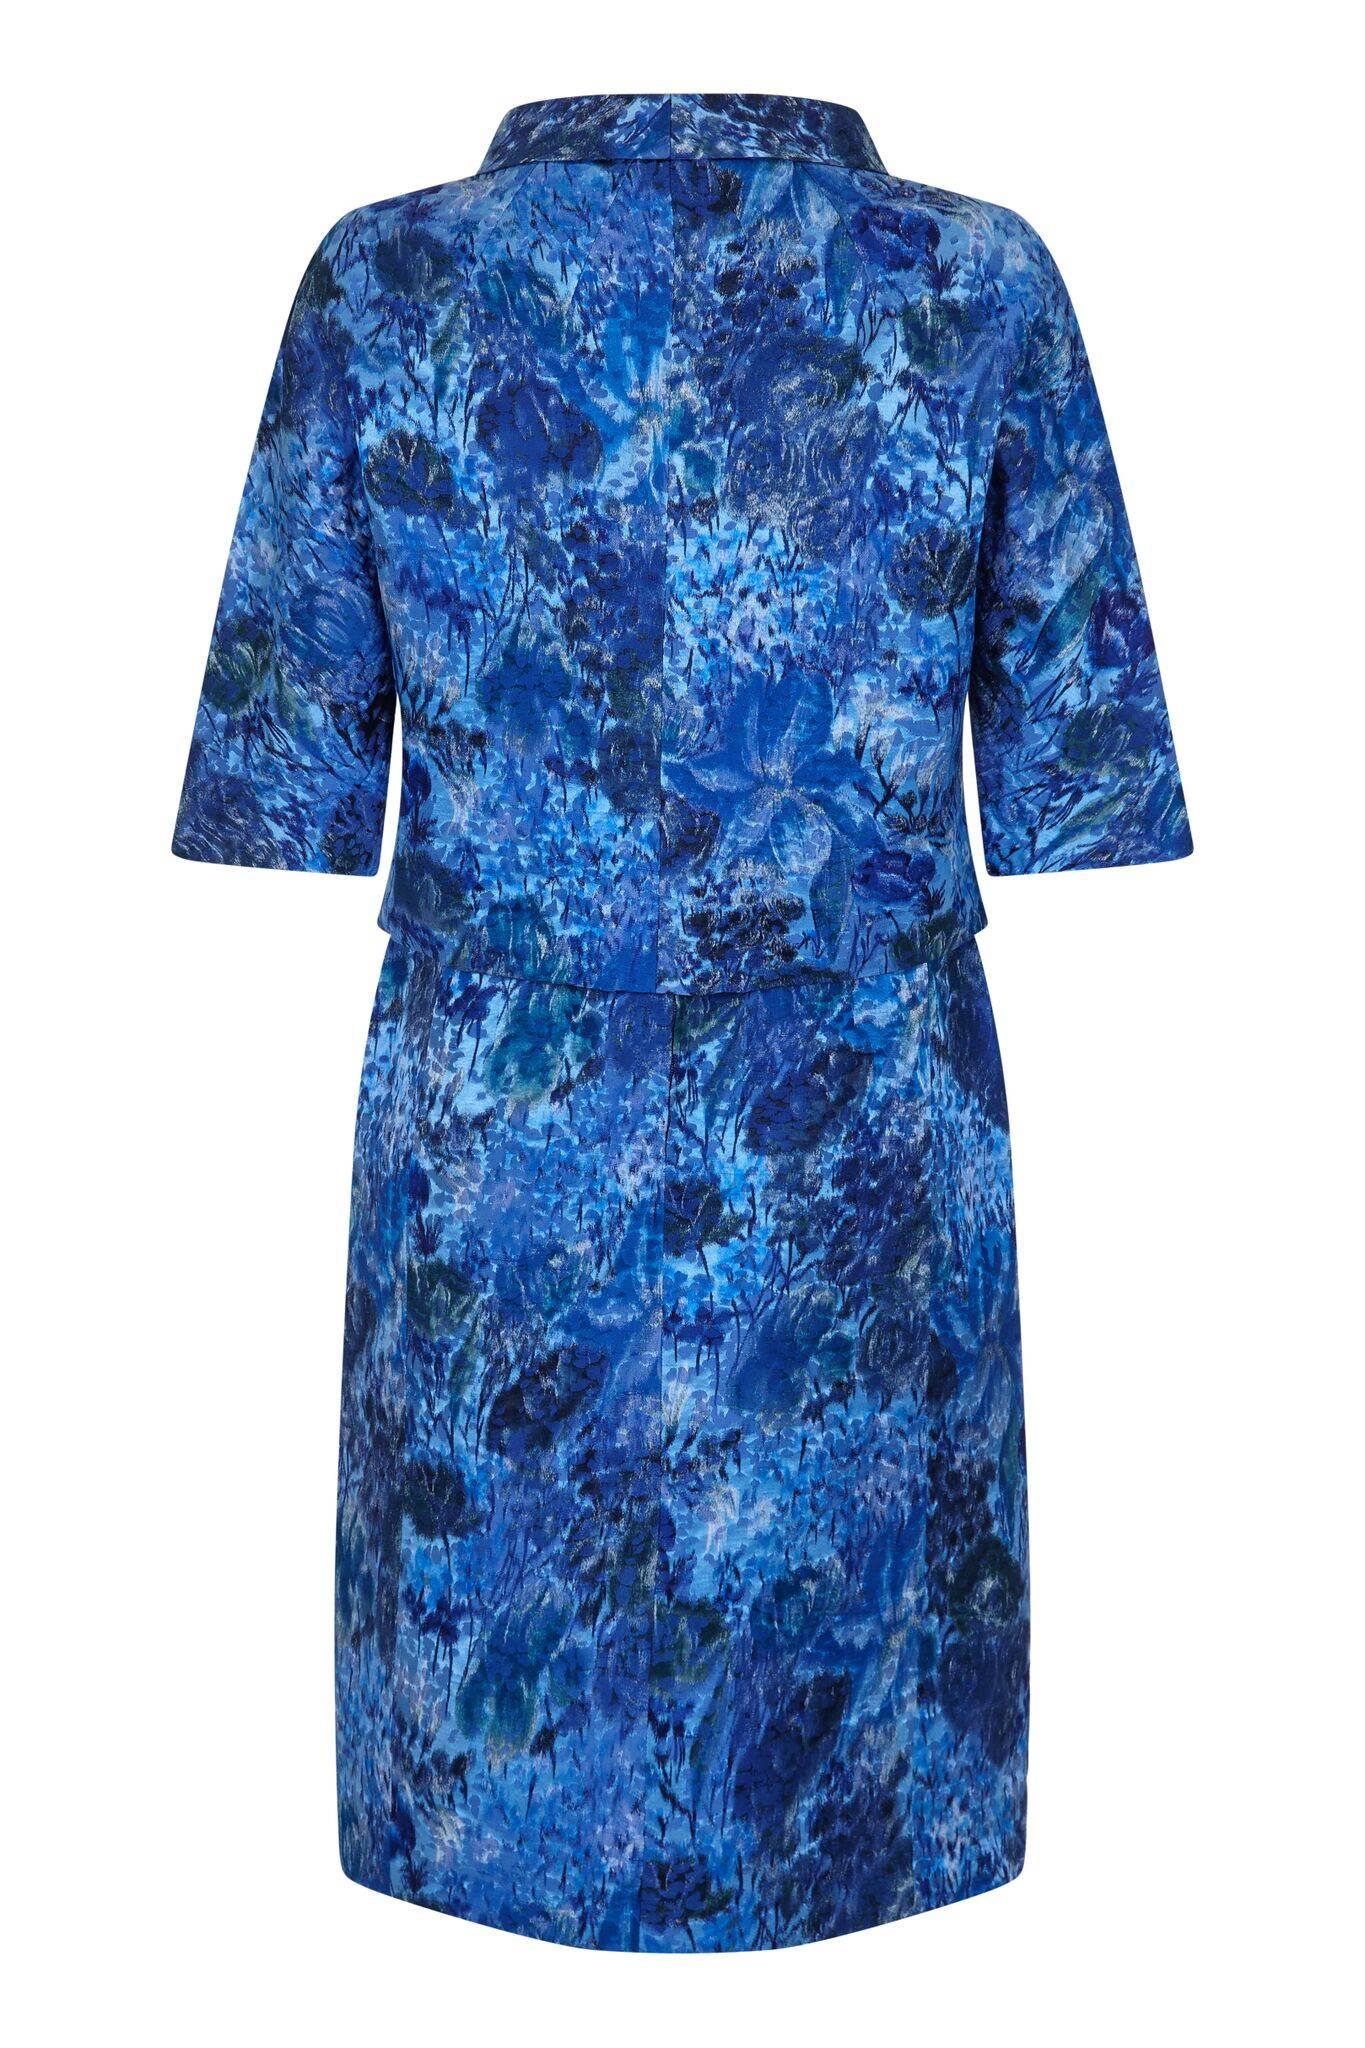 1960s French Couture Blue Floral Textured Silk Dress & Jacket Suit In Excellent Condition For Sale In London, GB